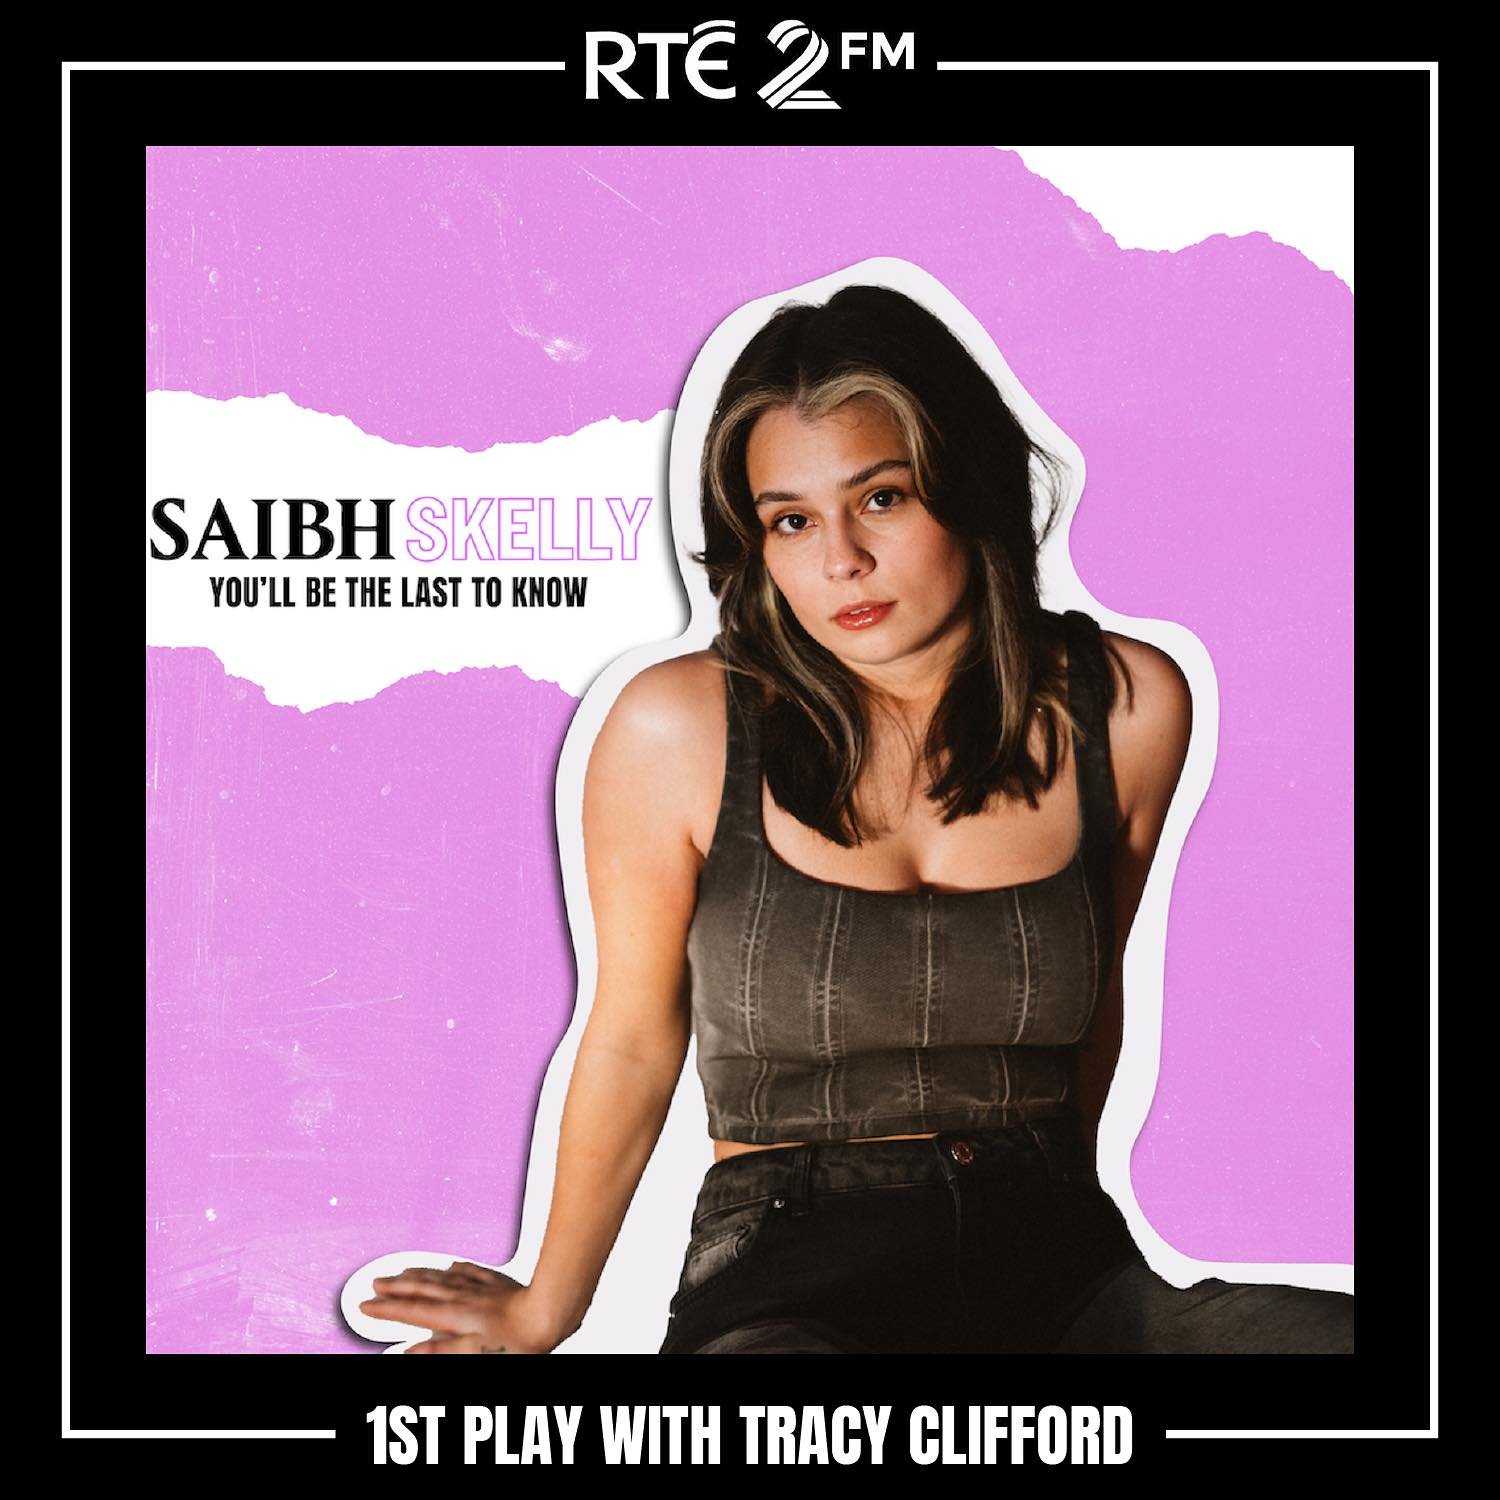 S A I B H  S K E L L Y

Tune in to @tracyclifford1 today on @rte2fm from 12 for the exclusive First Play of &lsquo;You&rsquo;ll Be The Last To Know&rsquo;, the brilliant new single from @saibhskellymusic 

If you like what you hear, be sure to presav